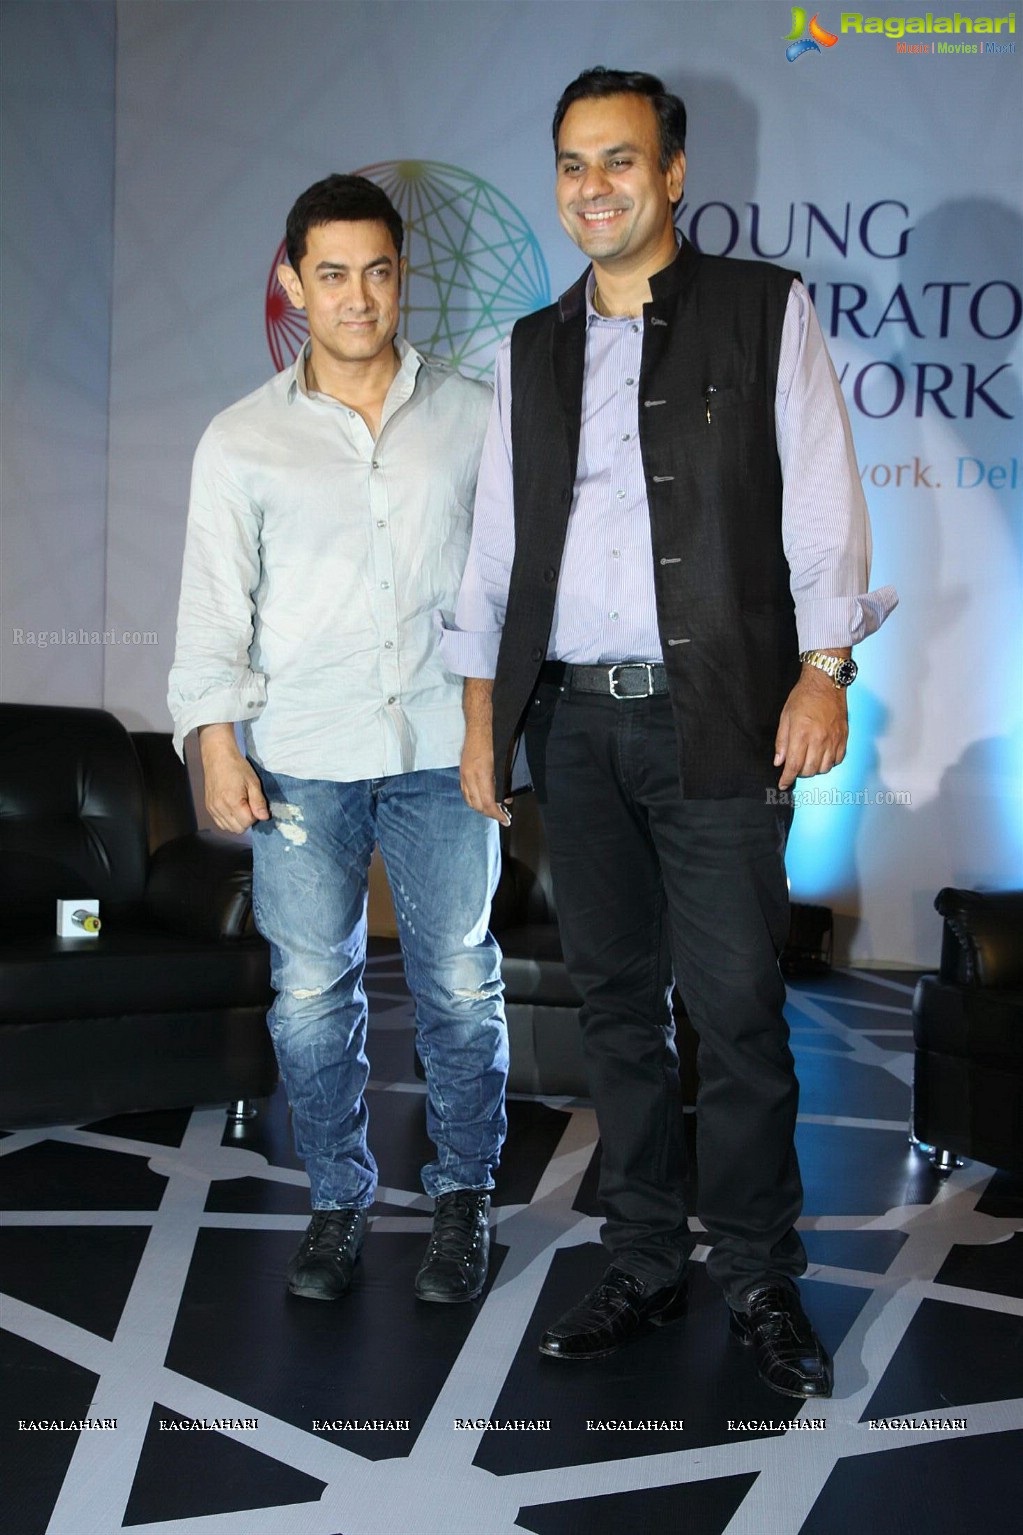 Aamir Khan at the launch of Young Inspirators Network